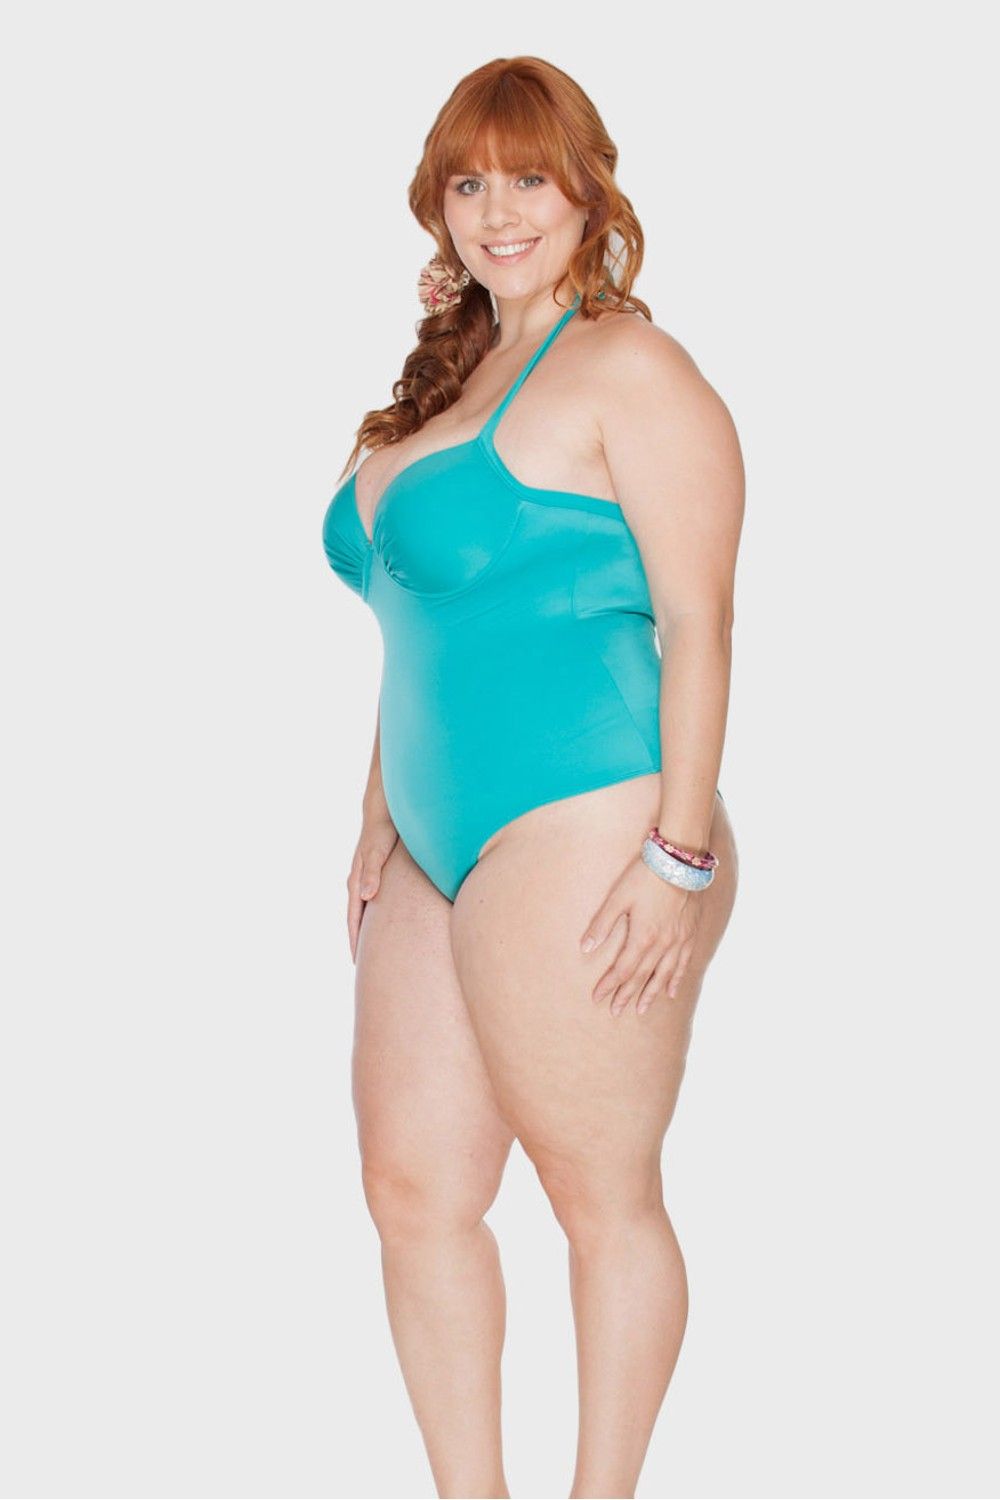 andy belluomini recommends plus size redhead model pic